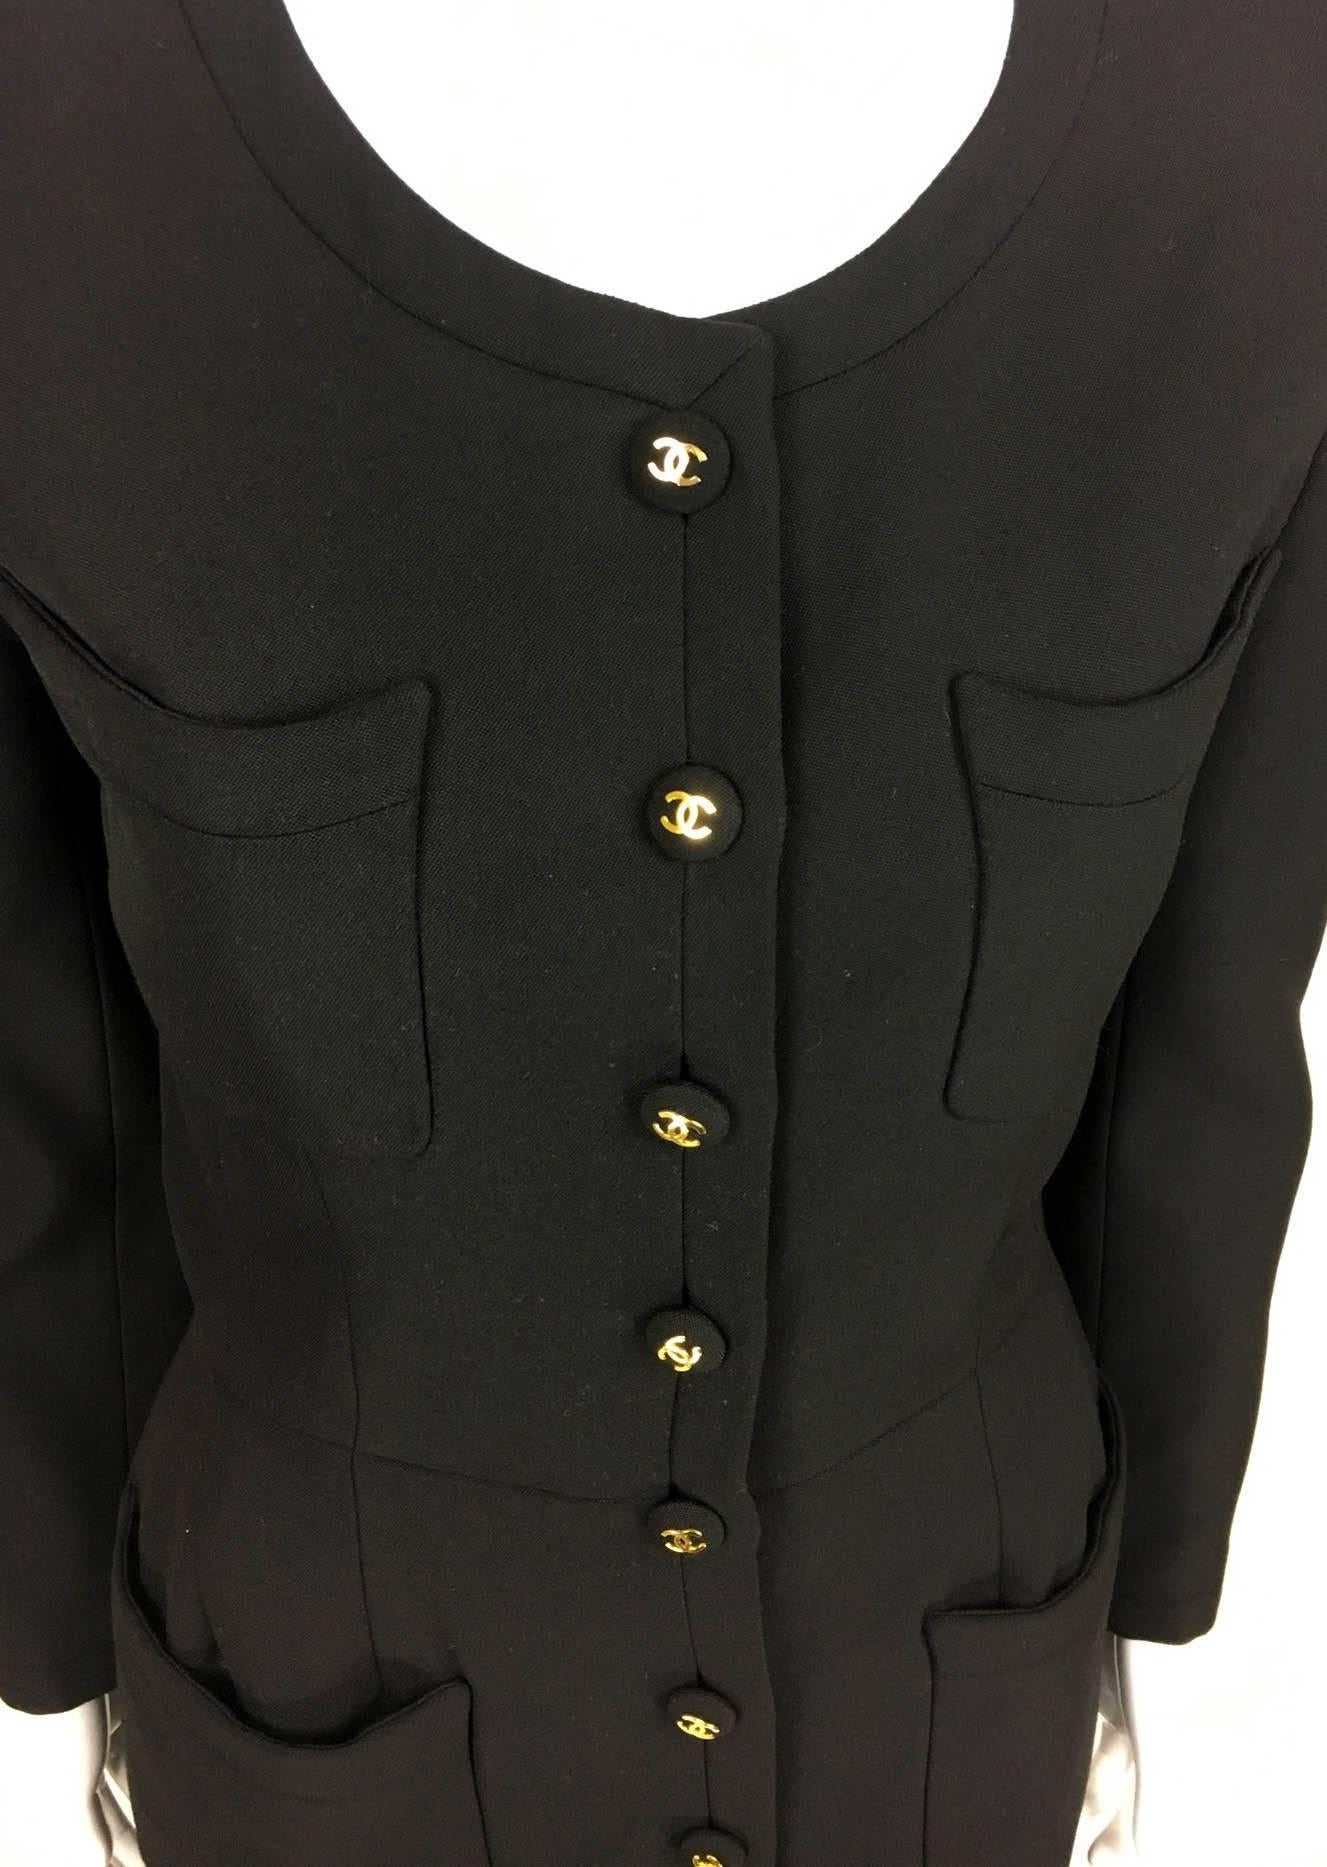 Chanel Belted Black Wool Dress With Logo Buttons - Circa 1992 In Excellent Condition In London, Chelsea